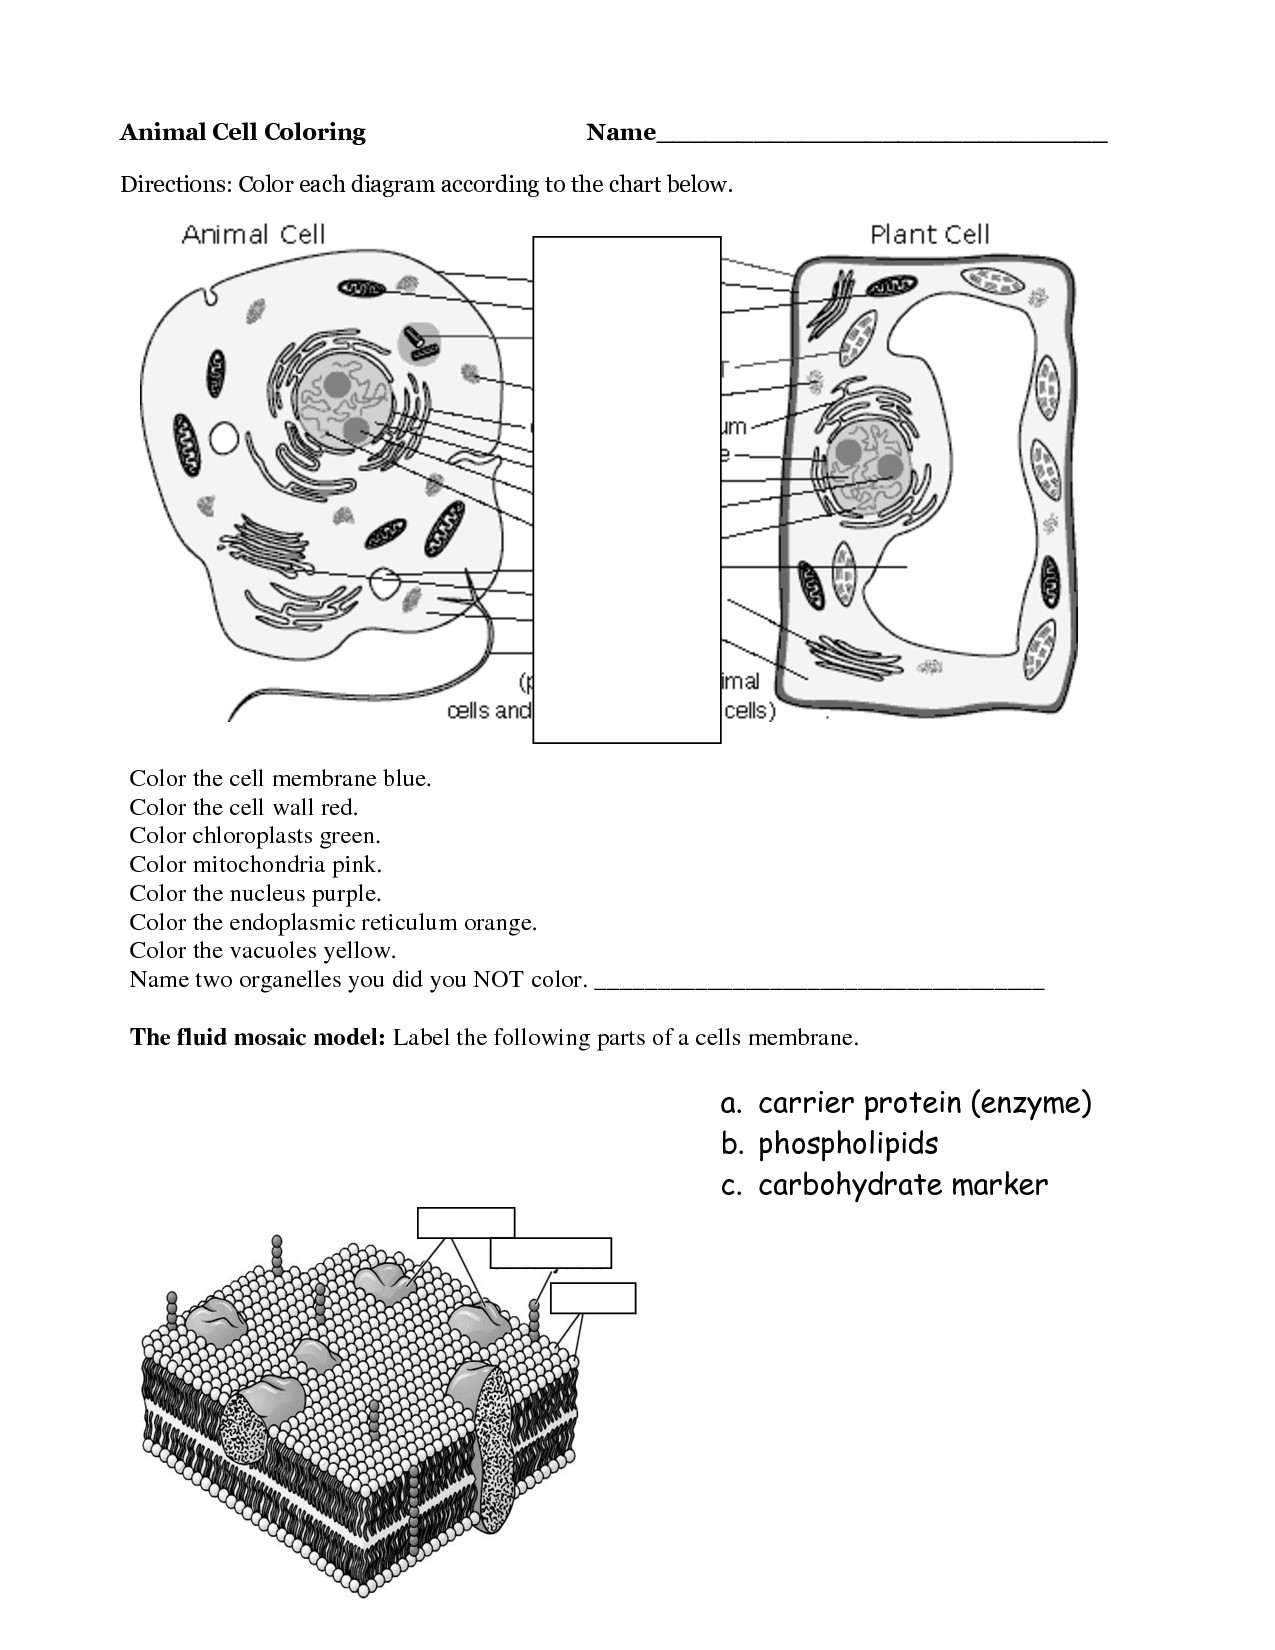 Plant Cell Coloring Worksheet Rc 9008] Detailed Color Diagram A Plant Cell Free Diagram